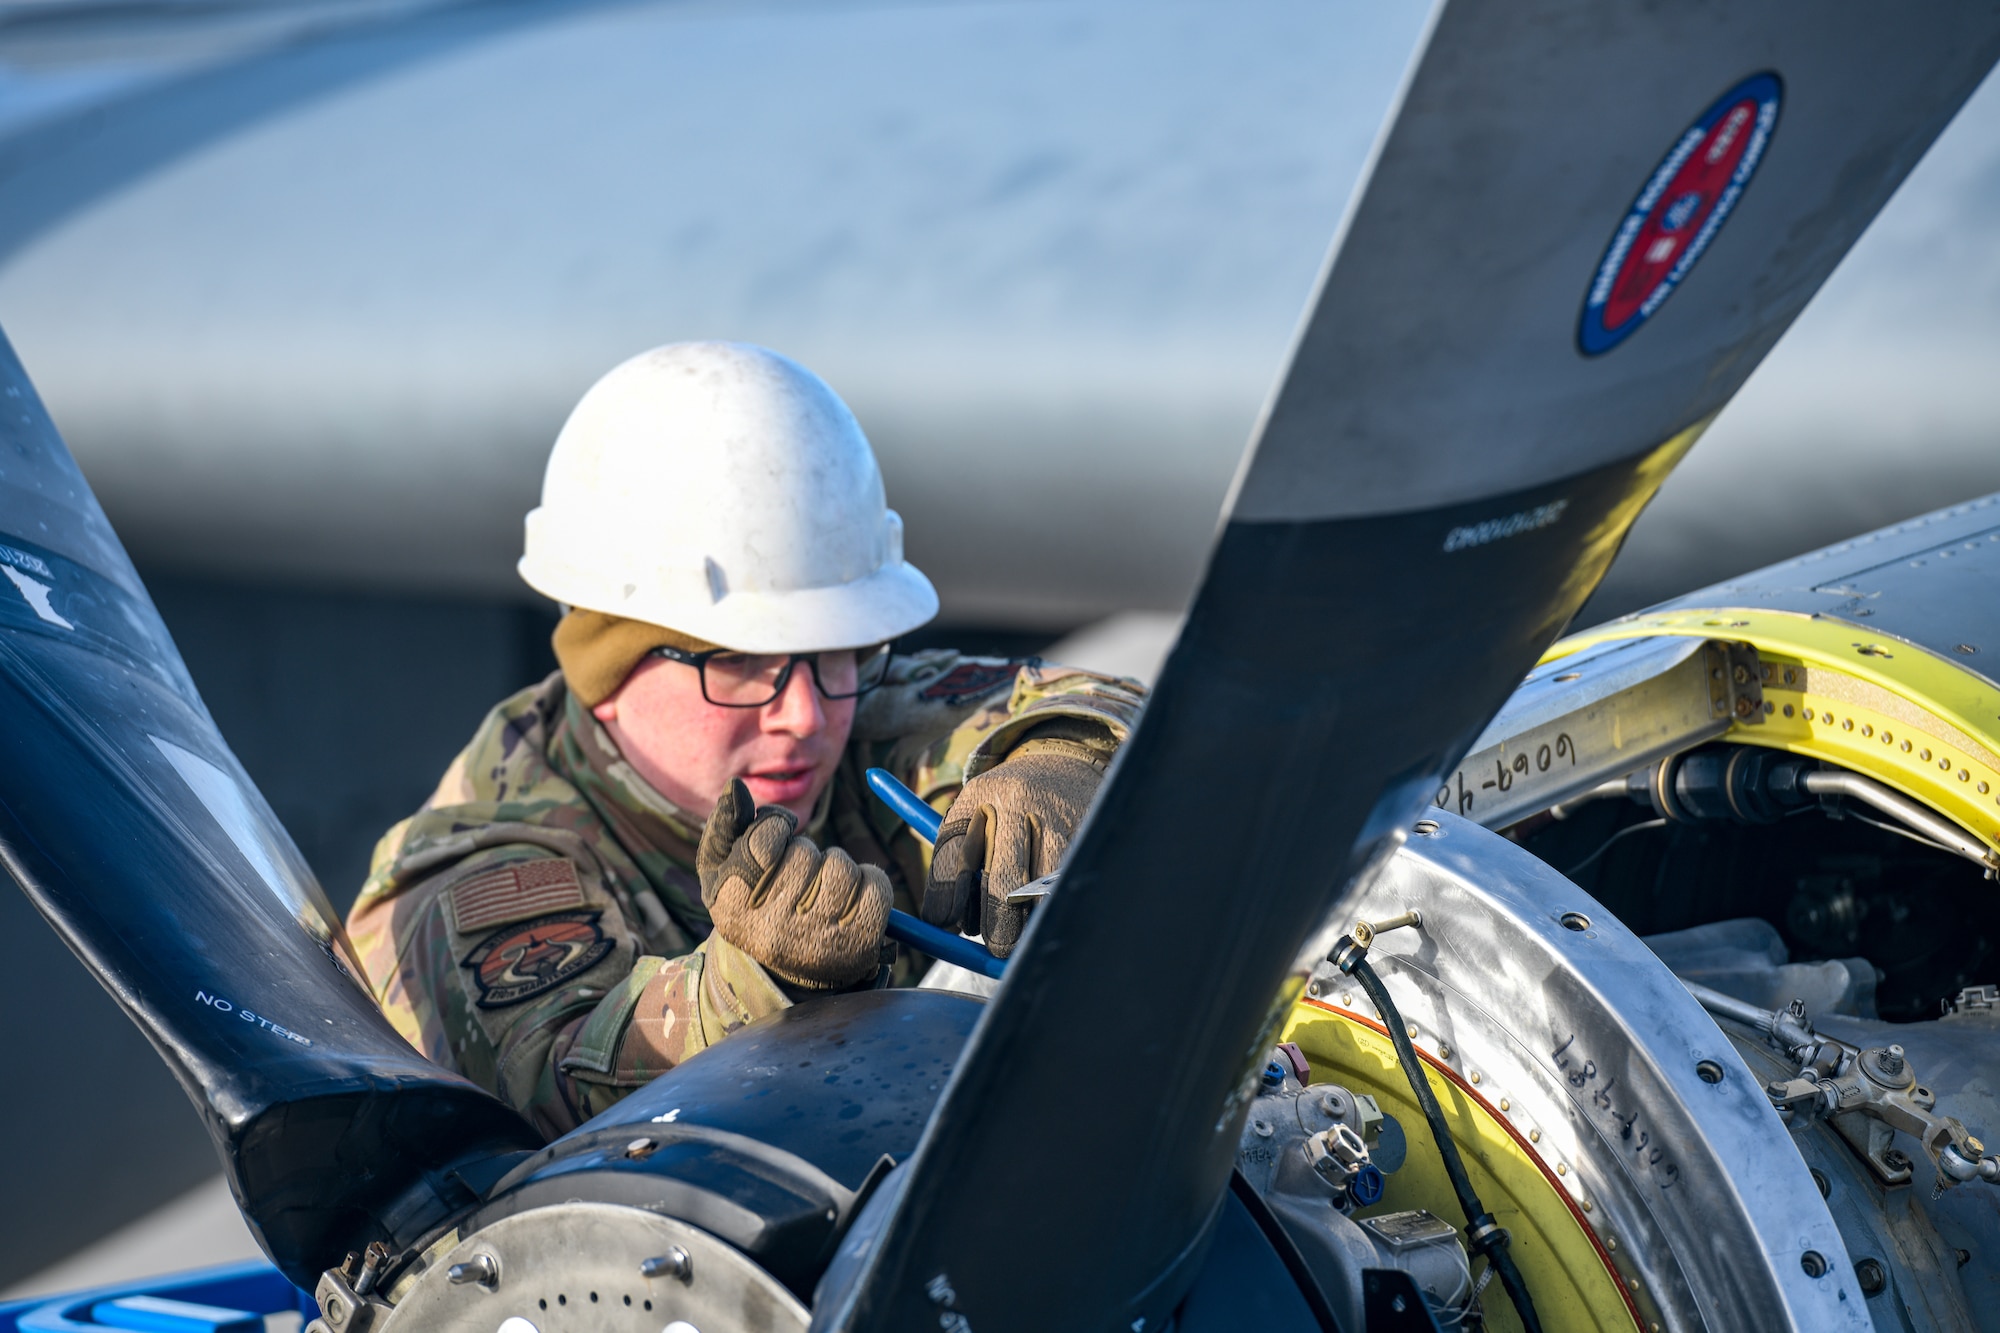 Staff Sgt. Kevin Johnson, an aerospace propulsion technician with the 910th Aircraft Maintenance Squadron, installs a propeller onto a 910th Airlift Wing C-130H Hercules aircraft, Jan. 17, 2023, at Mountain Home Air Force Base, Idaho.